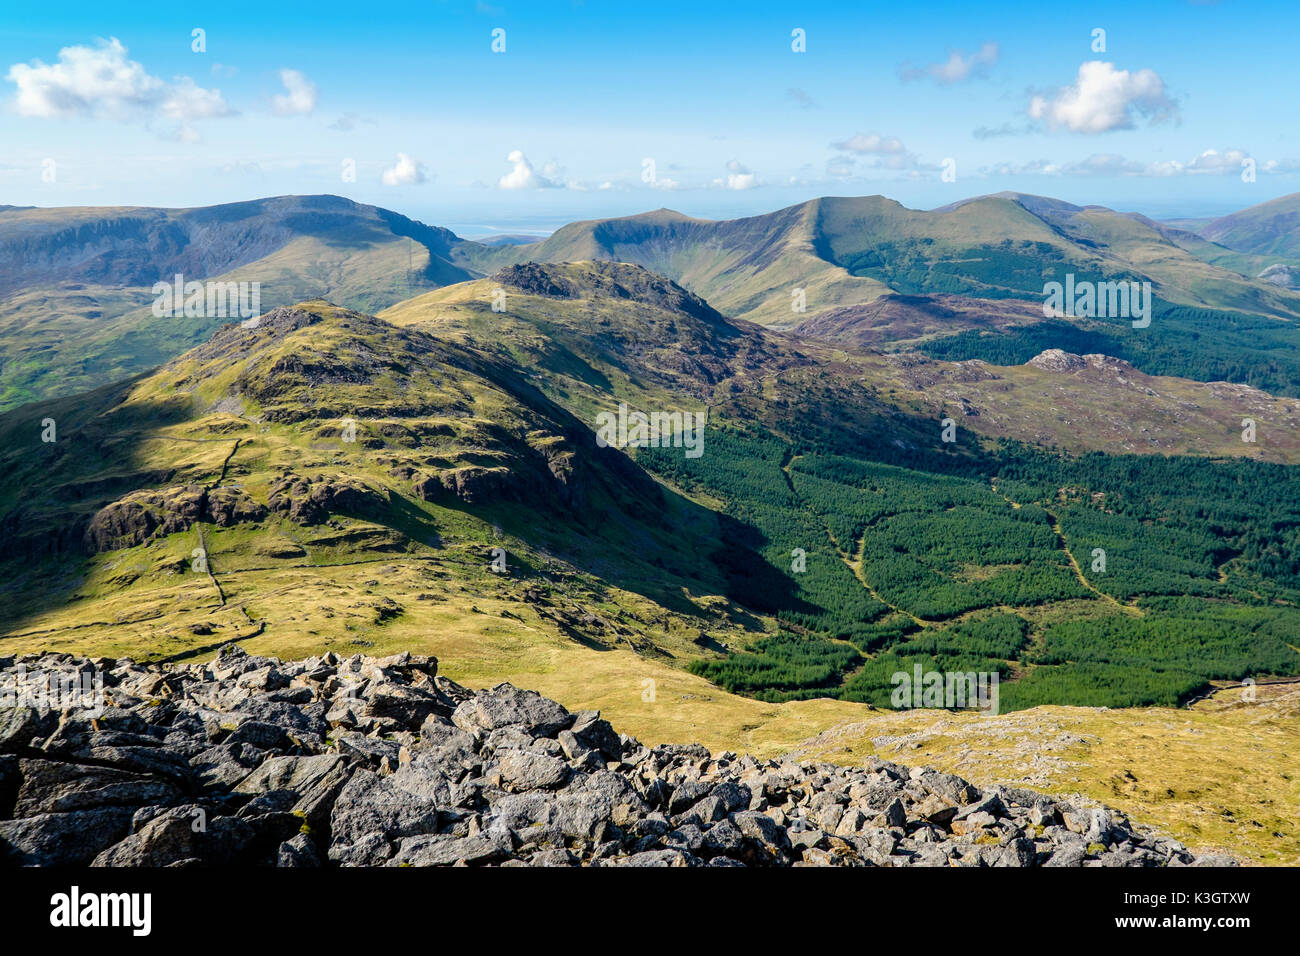 The Nantle Ridge, Snowdonia seen from Moel Hebog to the south. Snowdonia, North Wales, UK Stock Photo